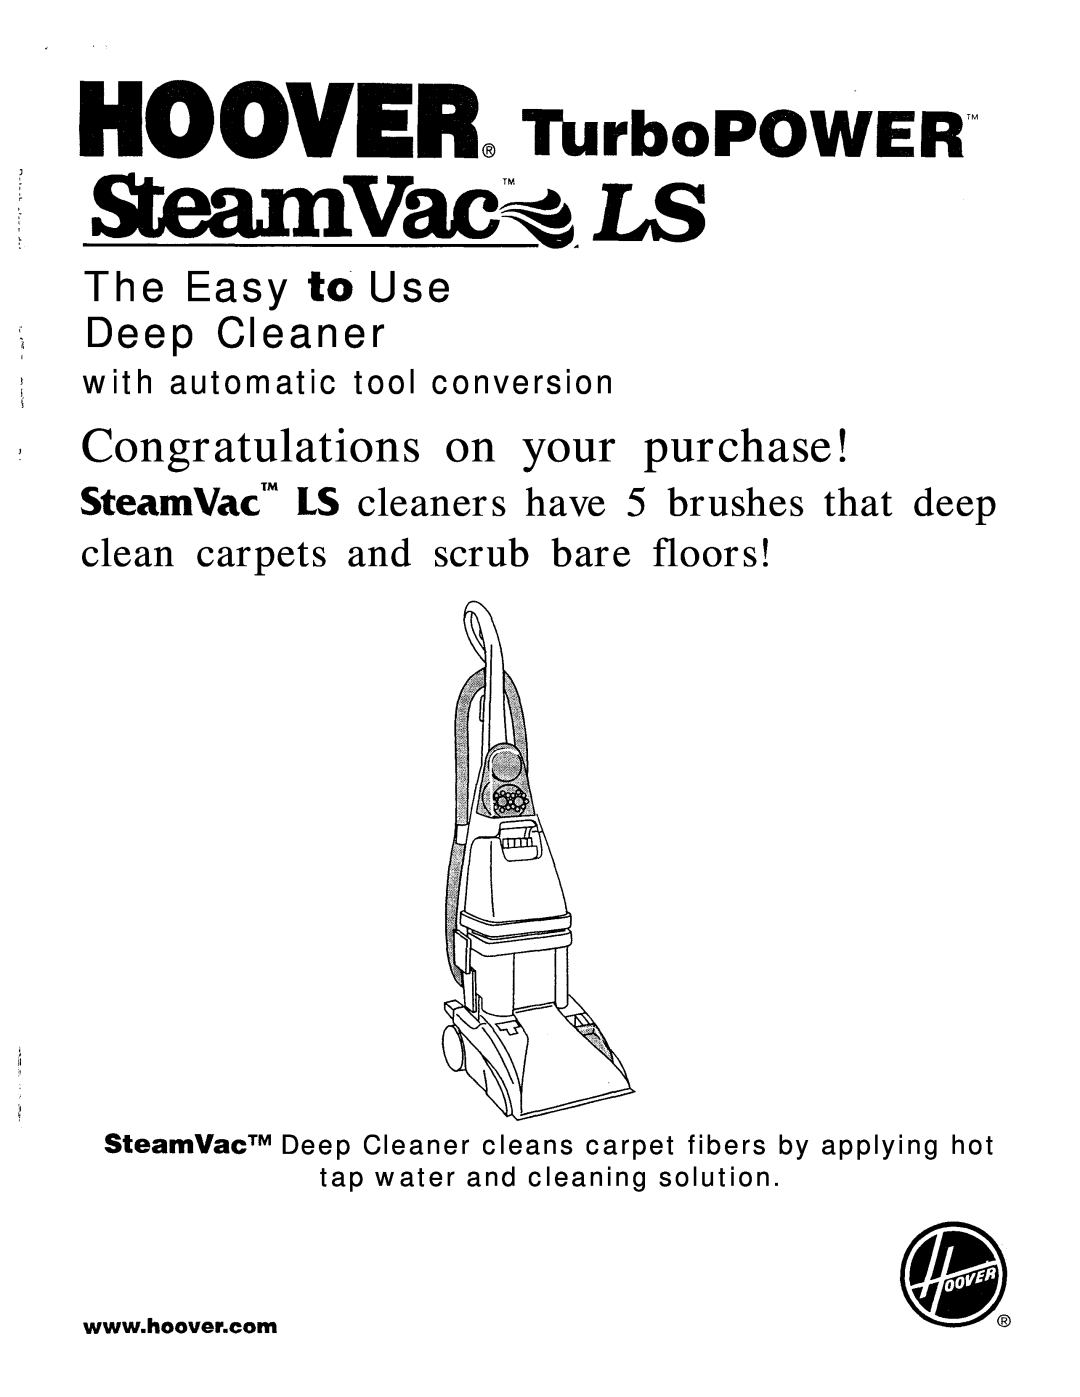 Hoover SteamVac" LS manual I’iI, The Easy to Use Deep Cleaner, with automatic tool conversion, aii@ 